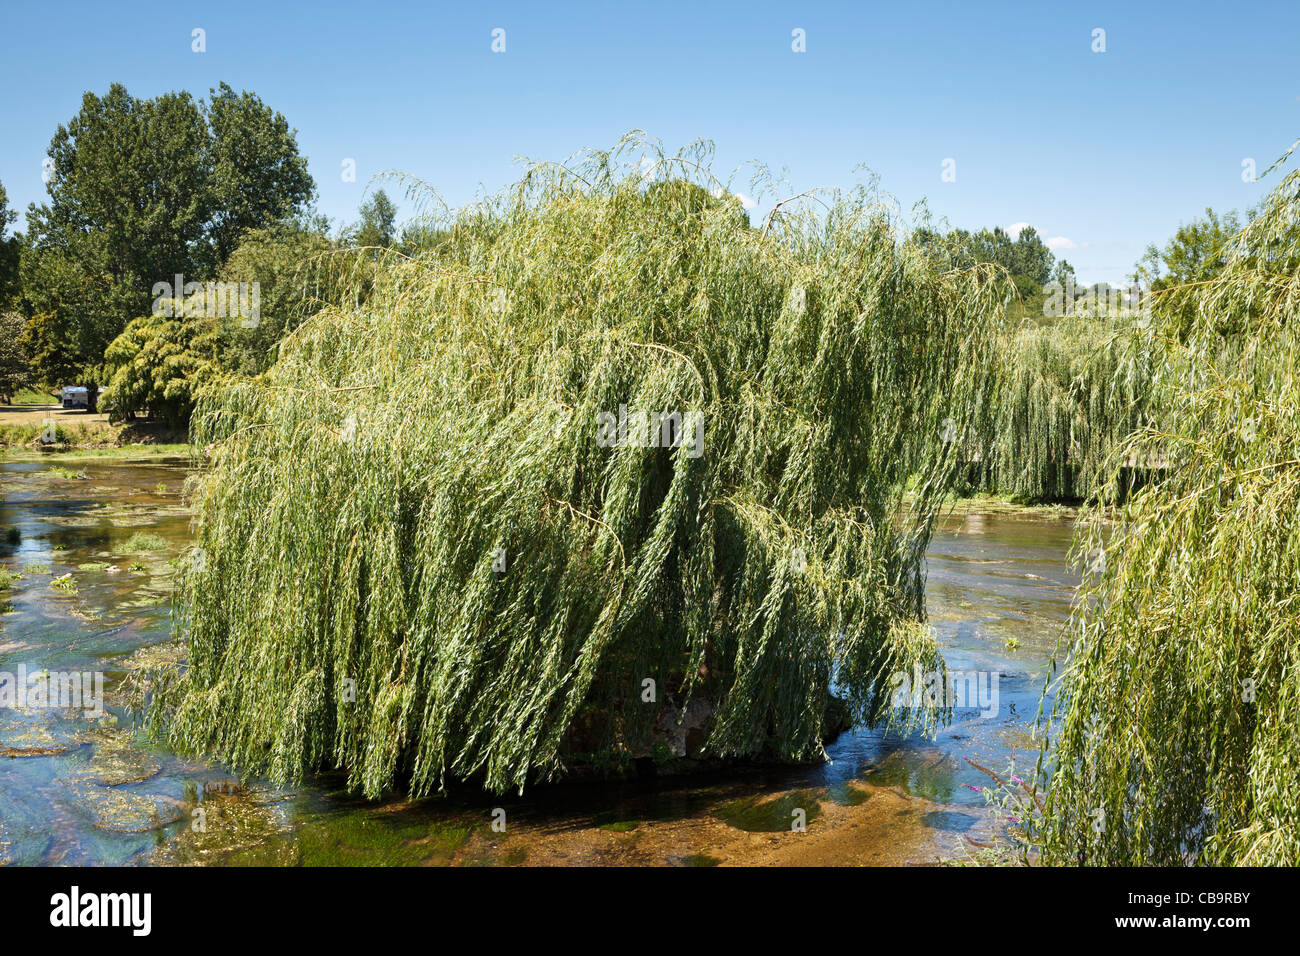 Willow trees growing on tiny islands in a river Stock Photo